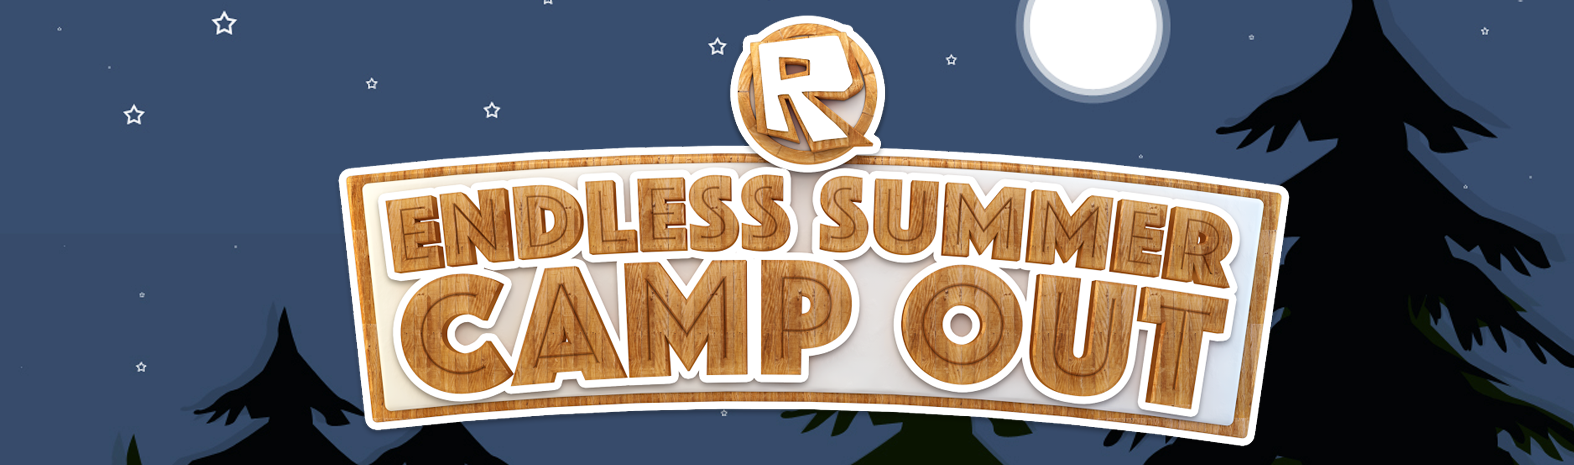 Announcing The Endless Summer Camp Out All Night Livestreaming Event Roblox Blog - summer tournament event 2018 roblox blog